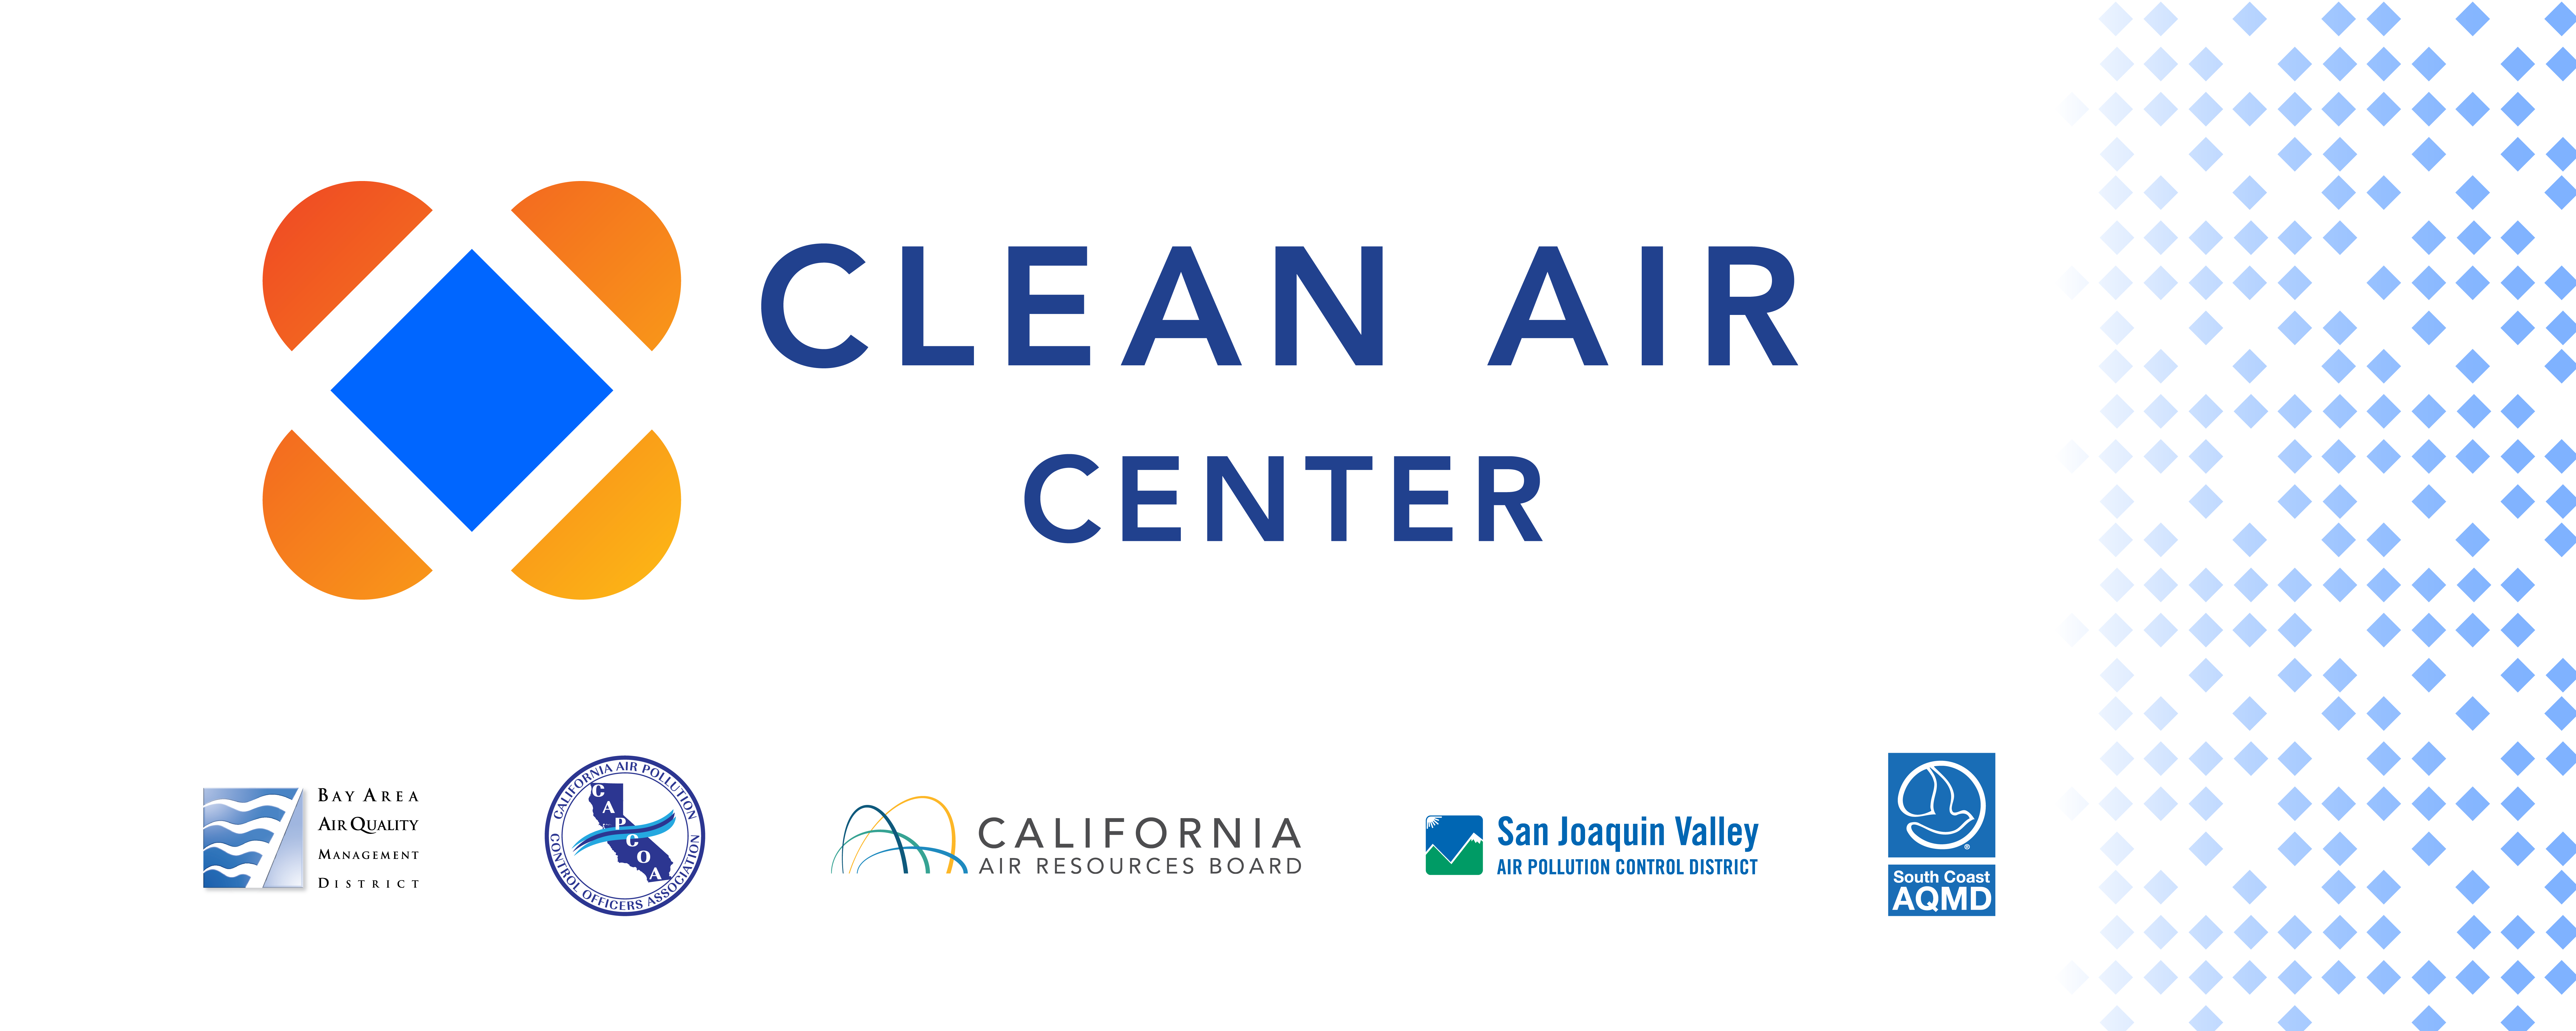 Clean Air Center banner with logos